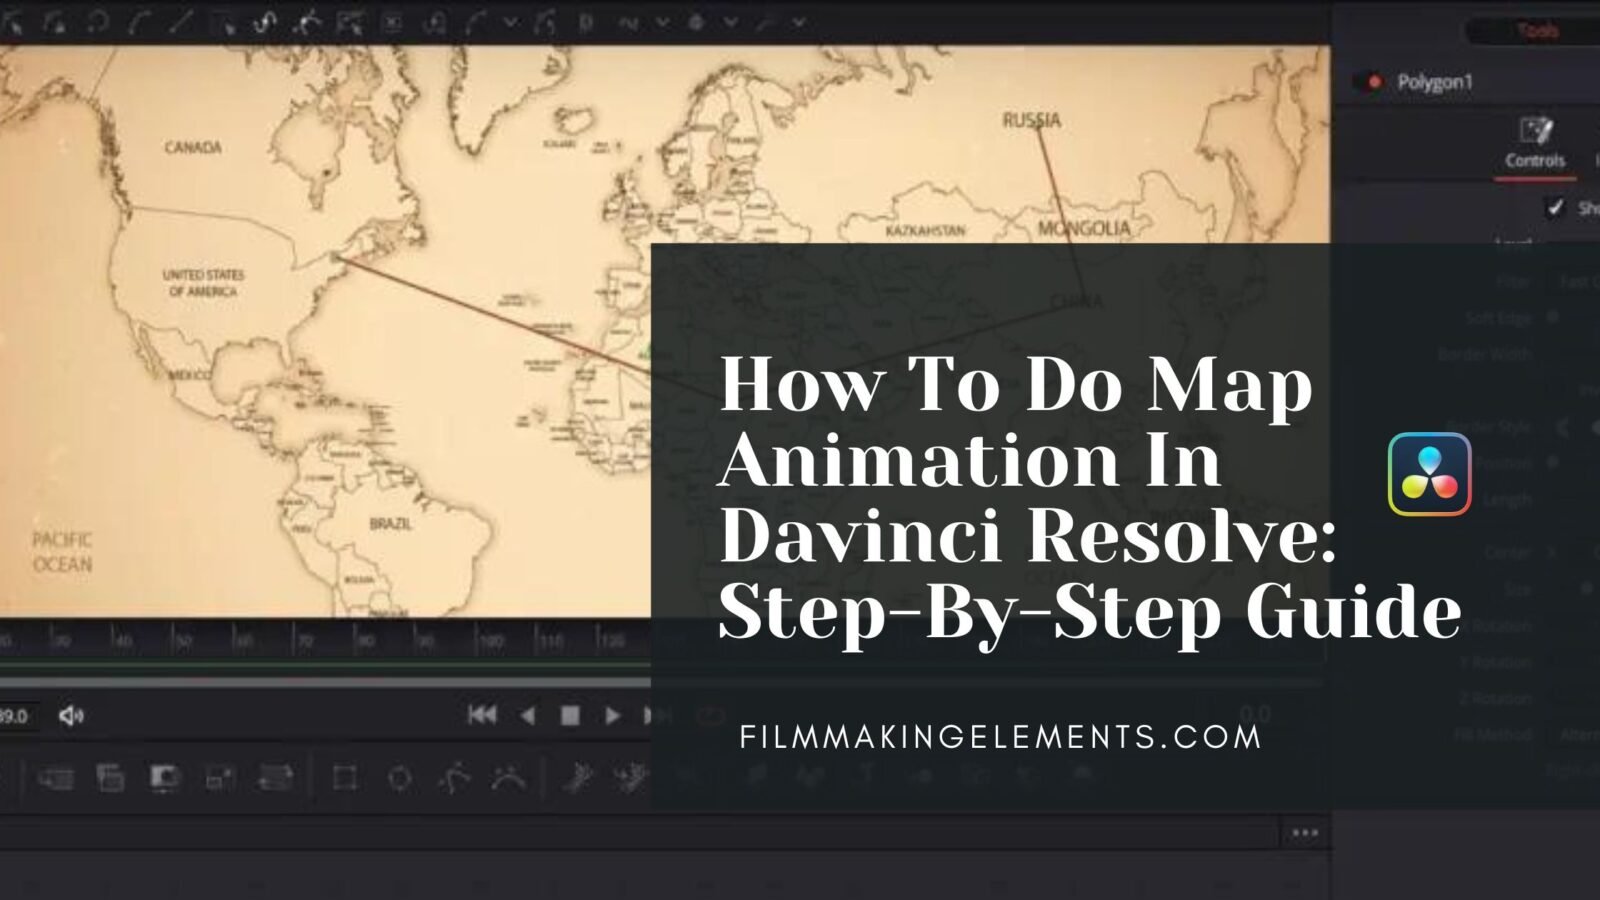 How To Do Map Animation In Davinci Resolve: Step-By-Step Guide